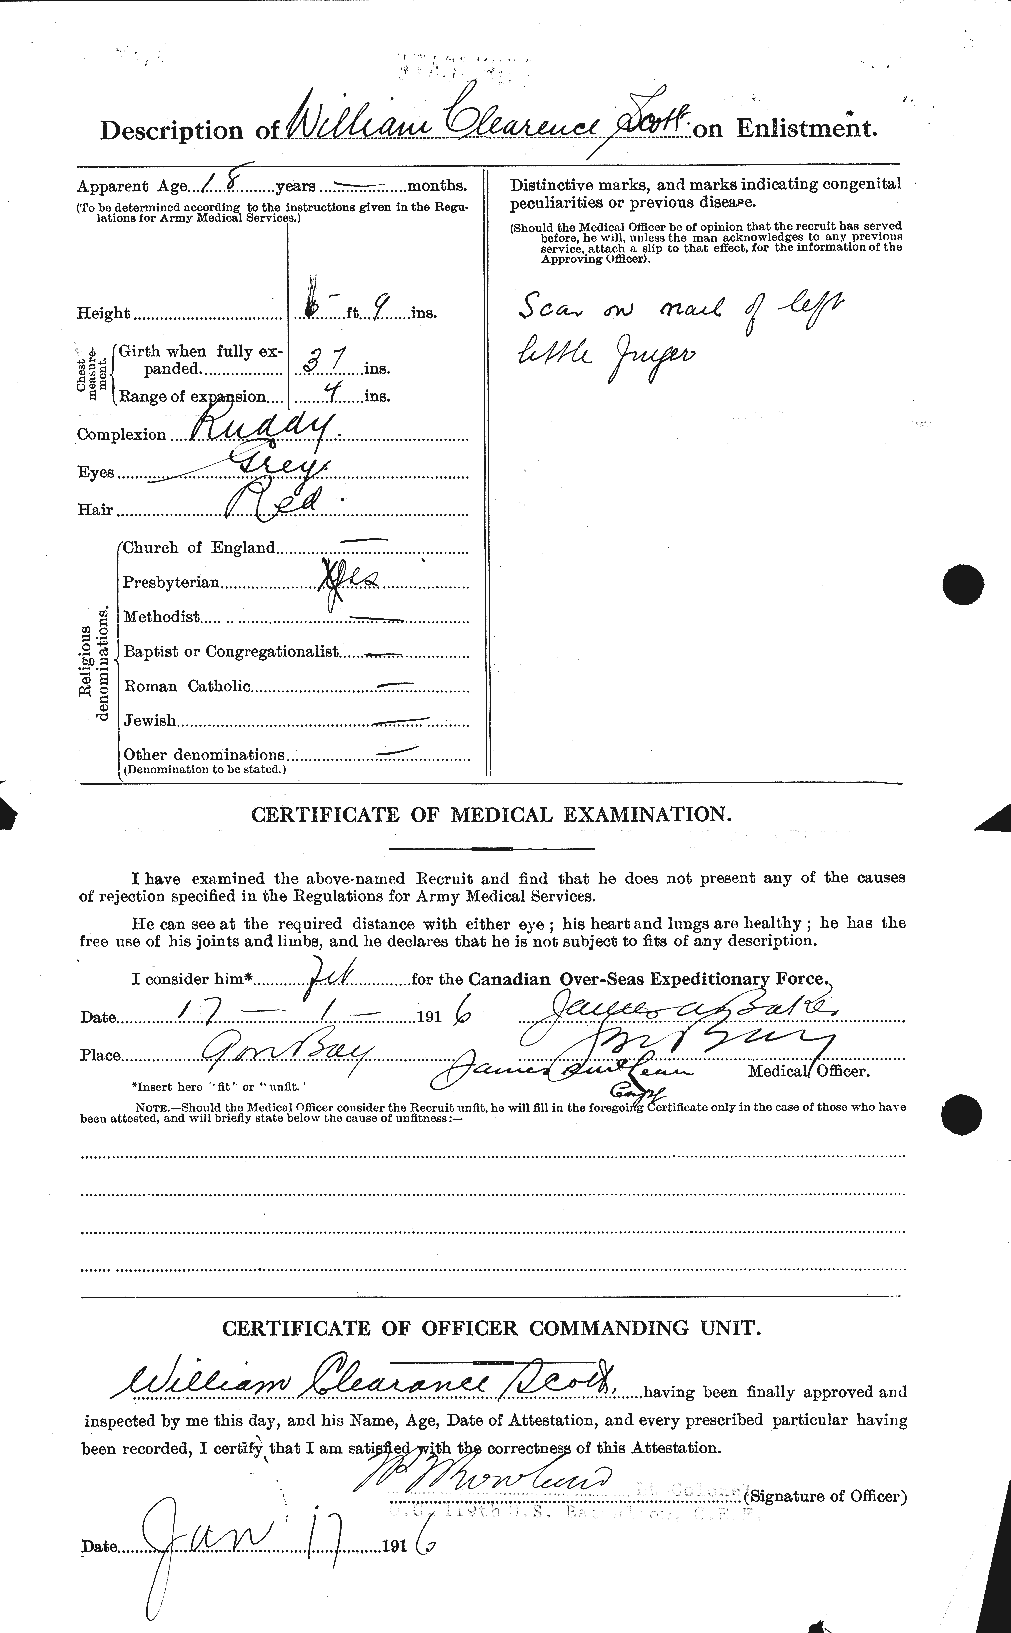 Personnel Records of the First World War - CEF 087039b